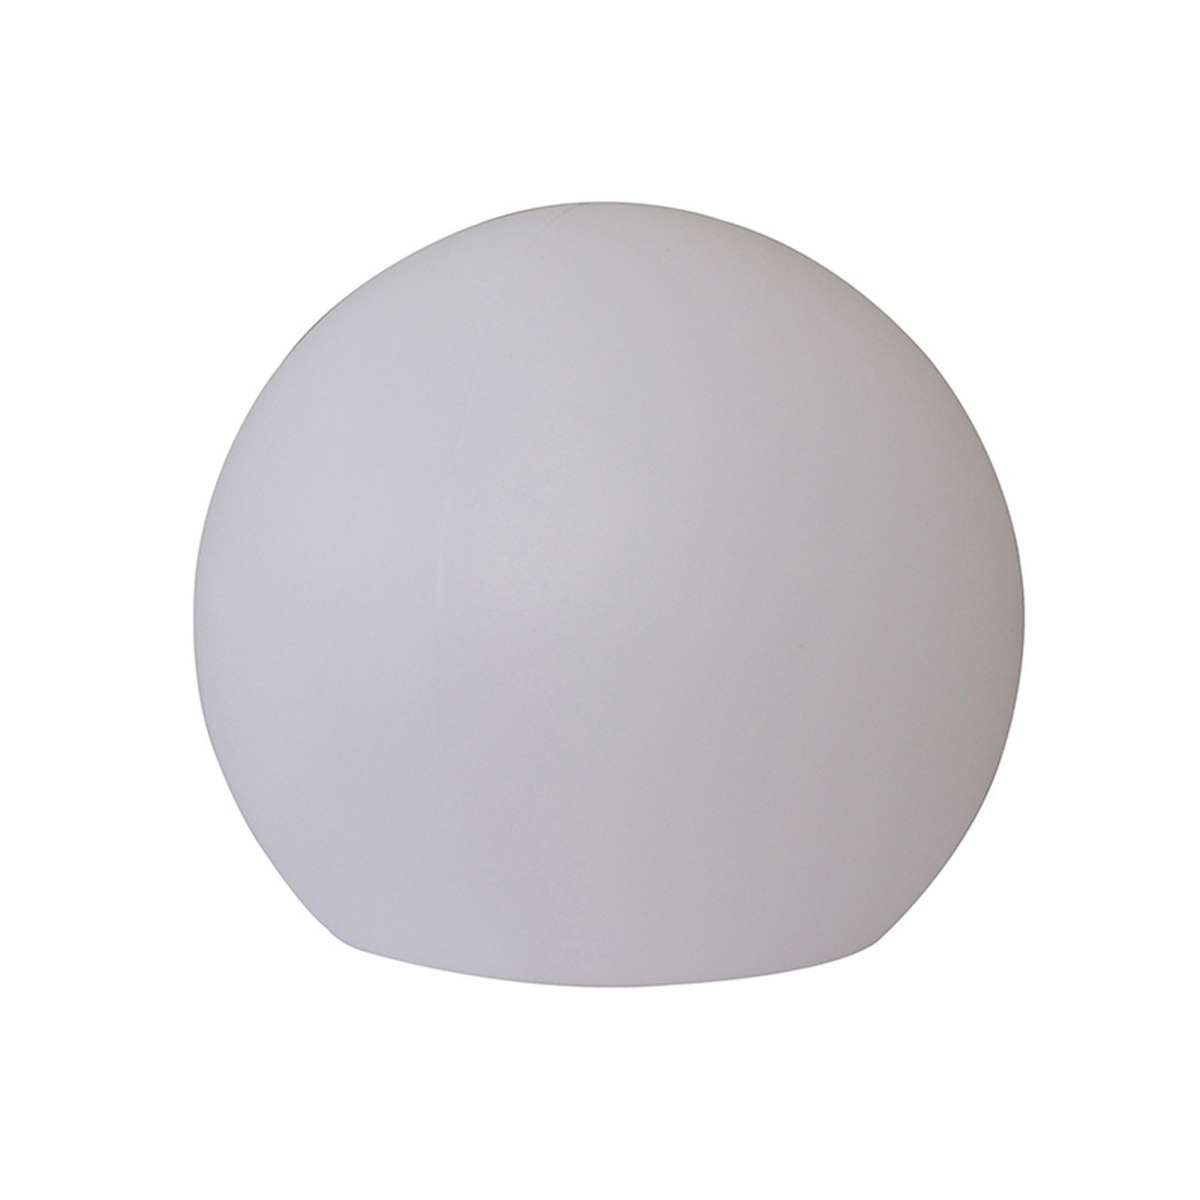 Lamp With Spherical Plastic Body And Inbuilt Led,Large,White By Benzara